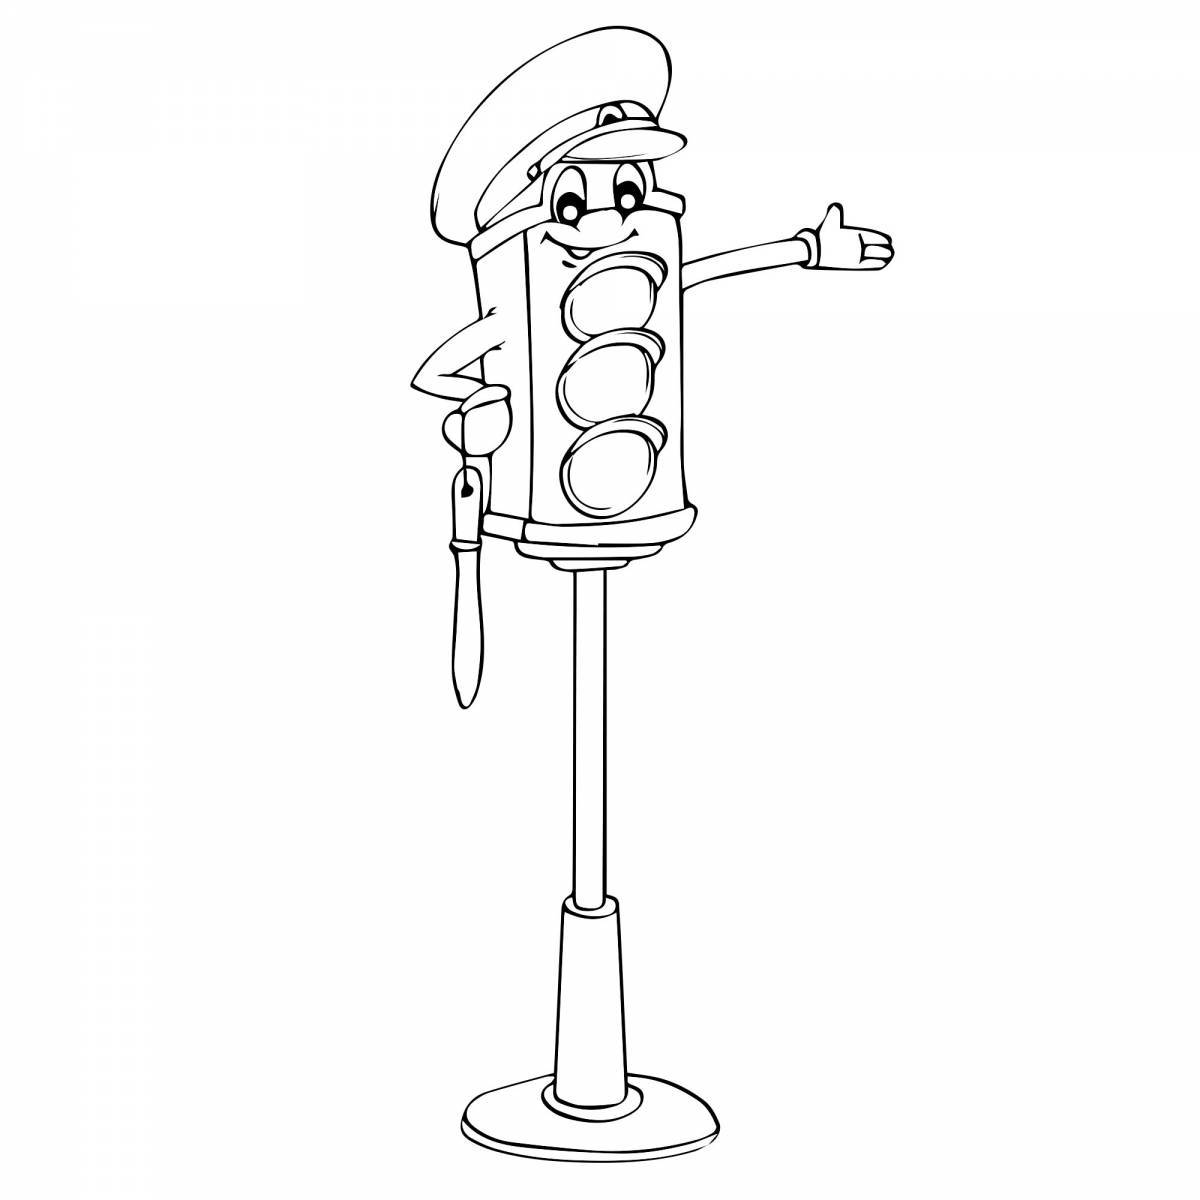 Creative traffic light coloring page for 6-7 year olds